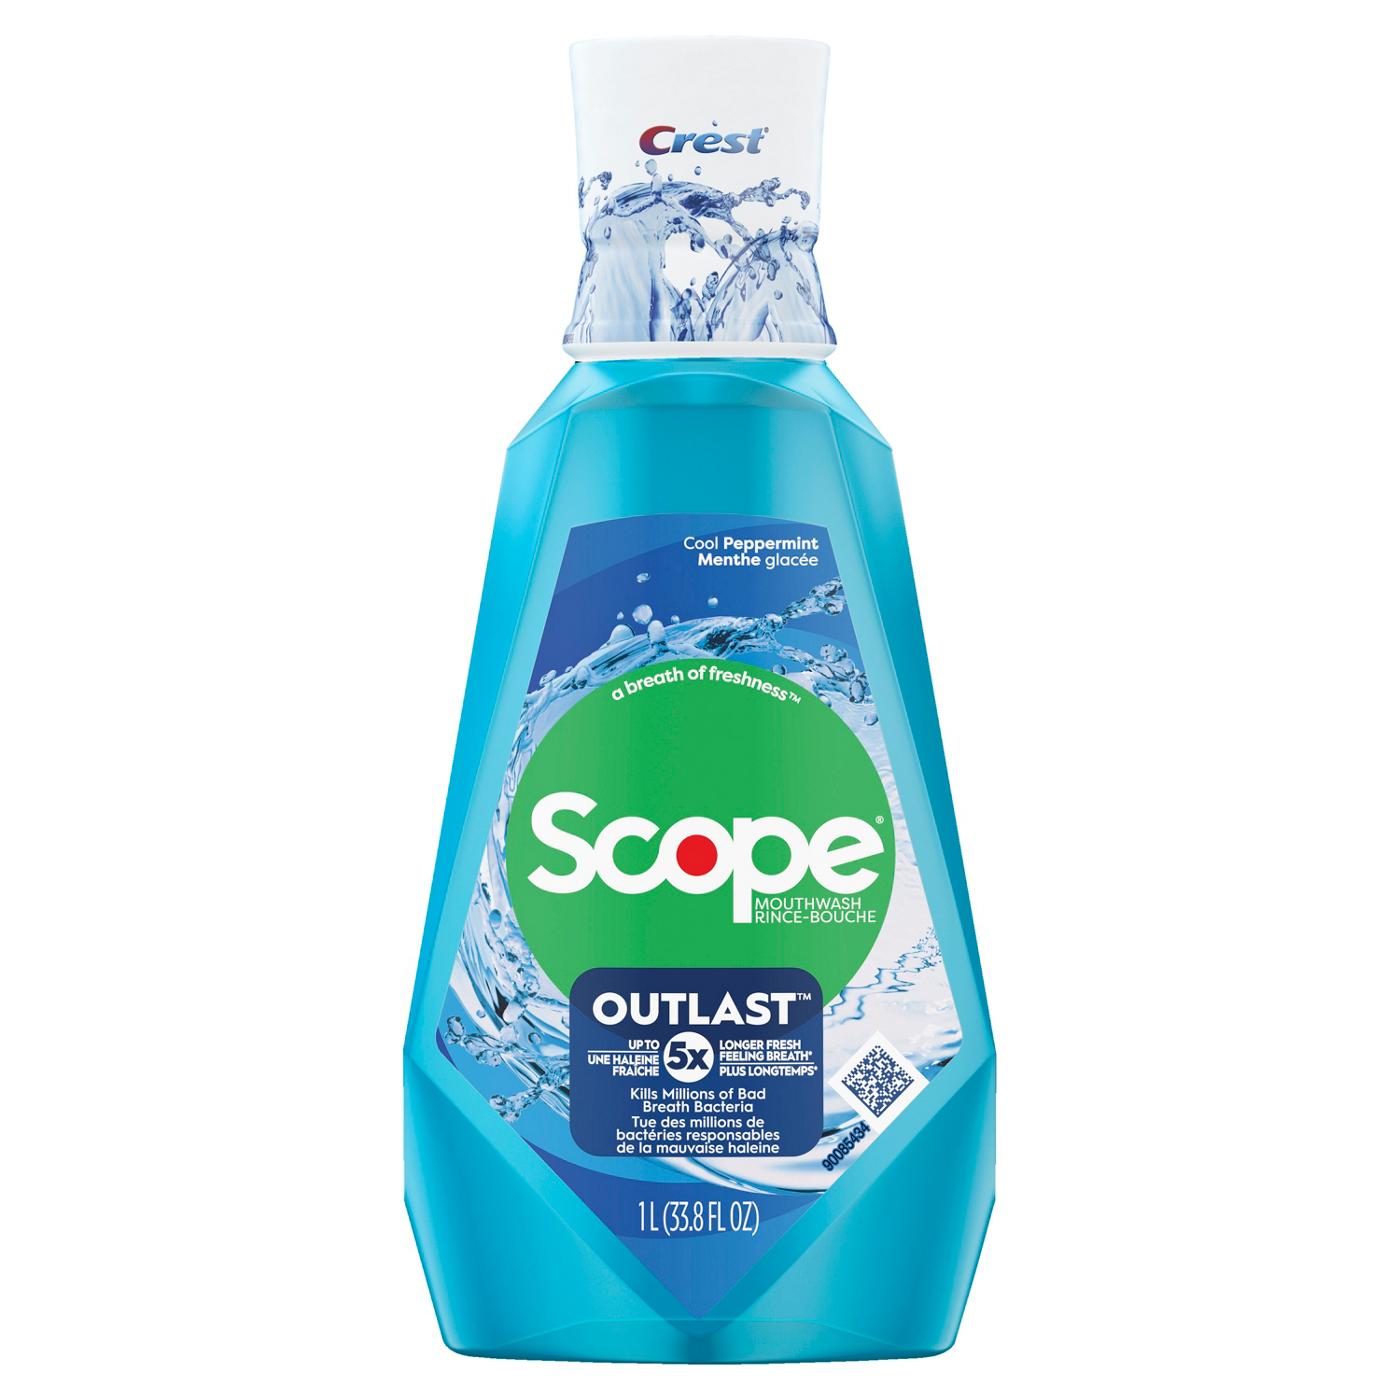 Crest Scope Outlast Mouthwash - Cool Peppermint; image 1 of 9